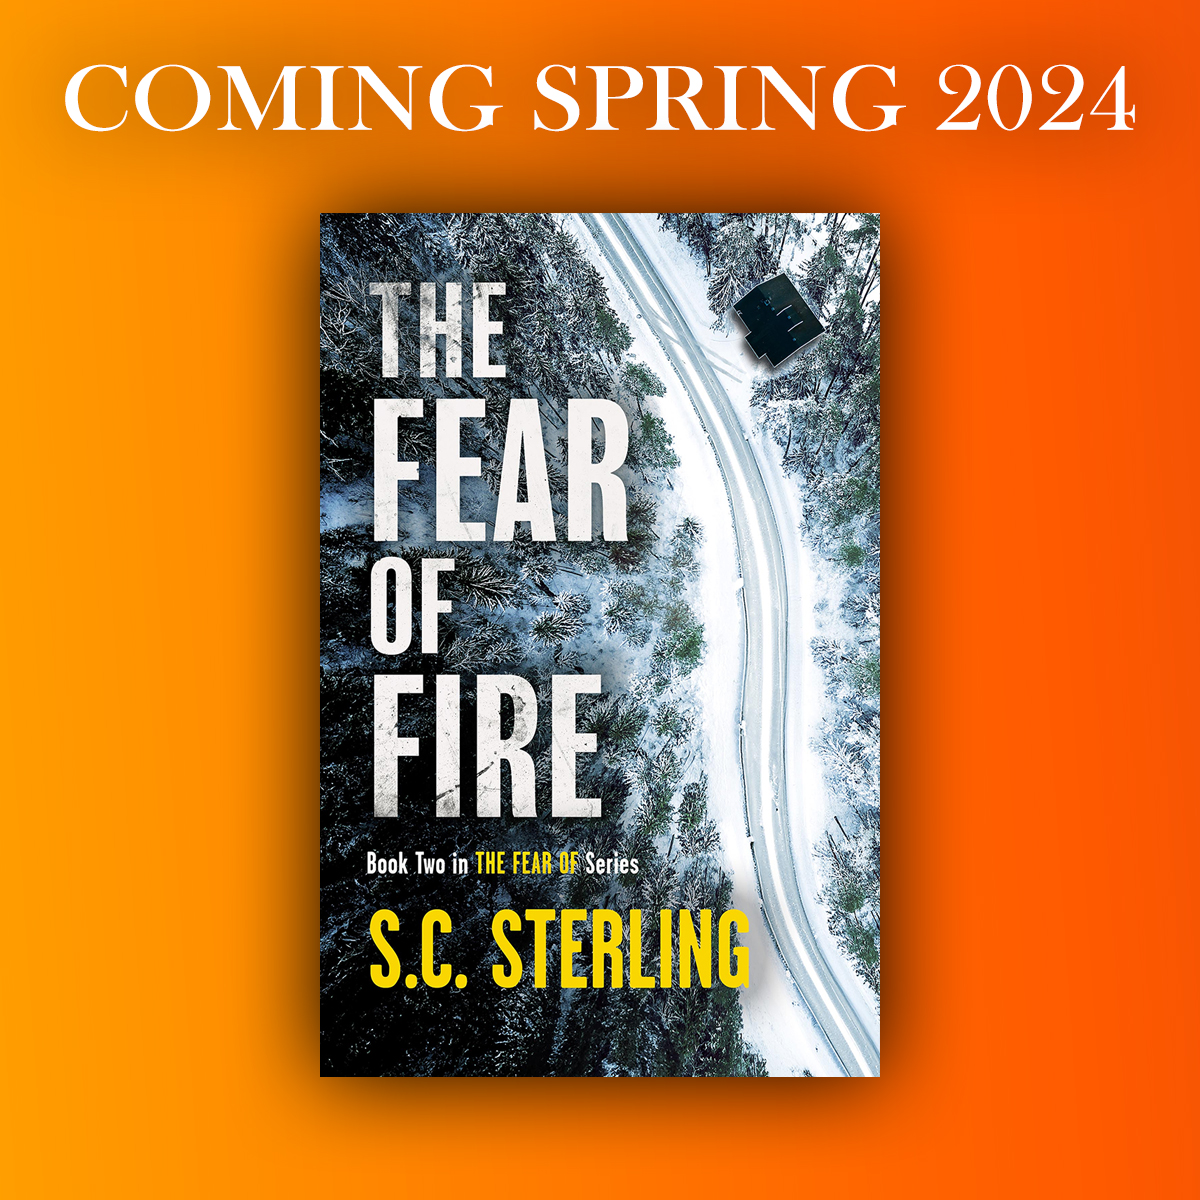 Coming Soon - The Fear of Fire: Book Two in the Fear of Series